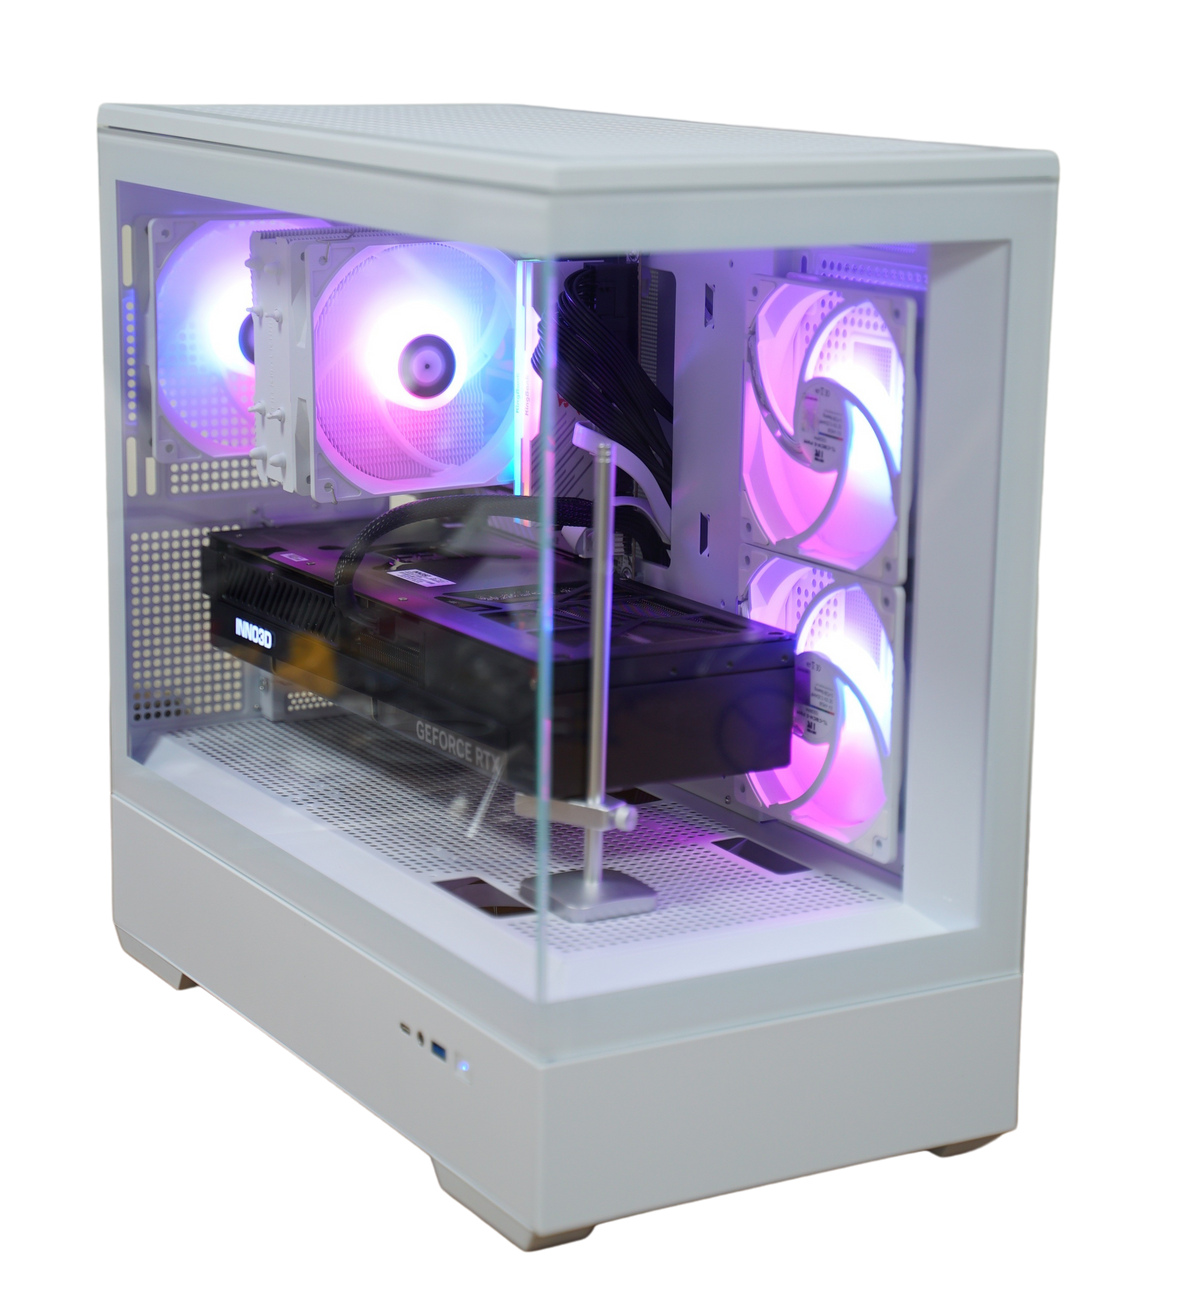 IronClad <b>Aquarion</b> <br> Mid-size Gaming Tower PC